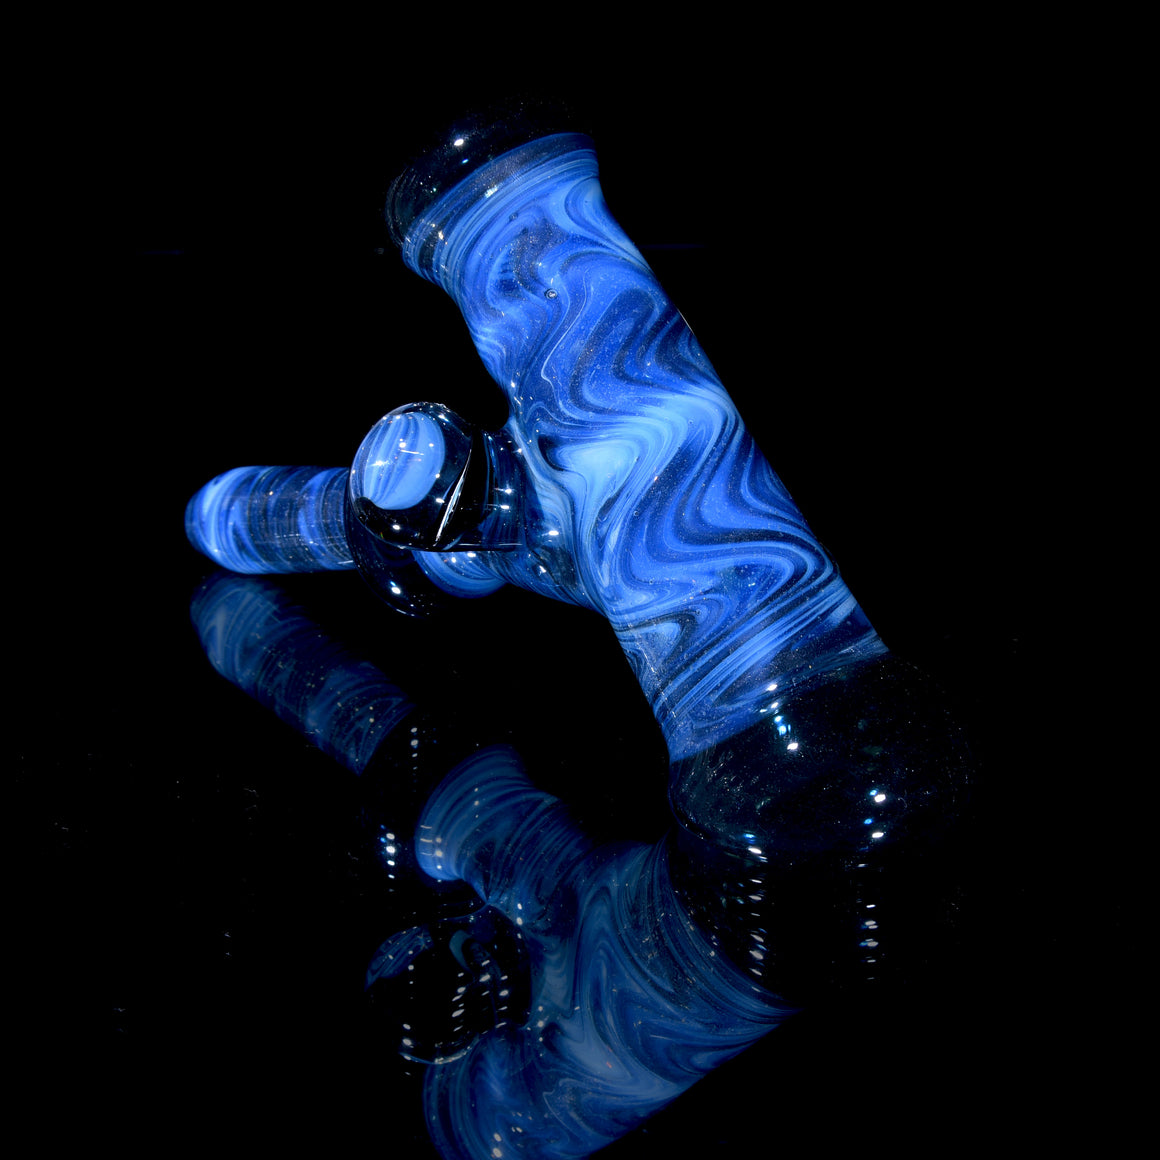 Fully-worked Dry Layback Hammer w/ Grateful Dead Millie - Moonstone/Blue Stardust